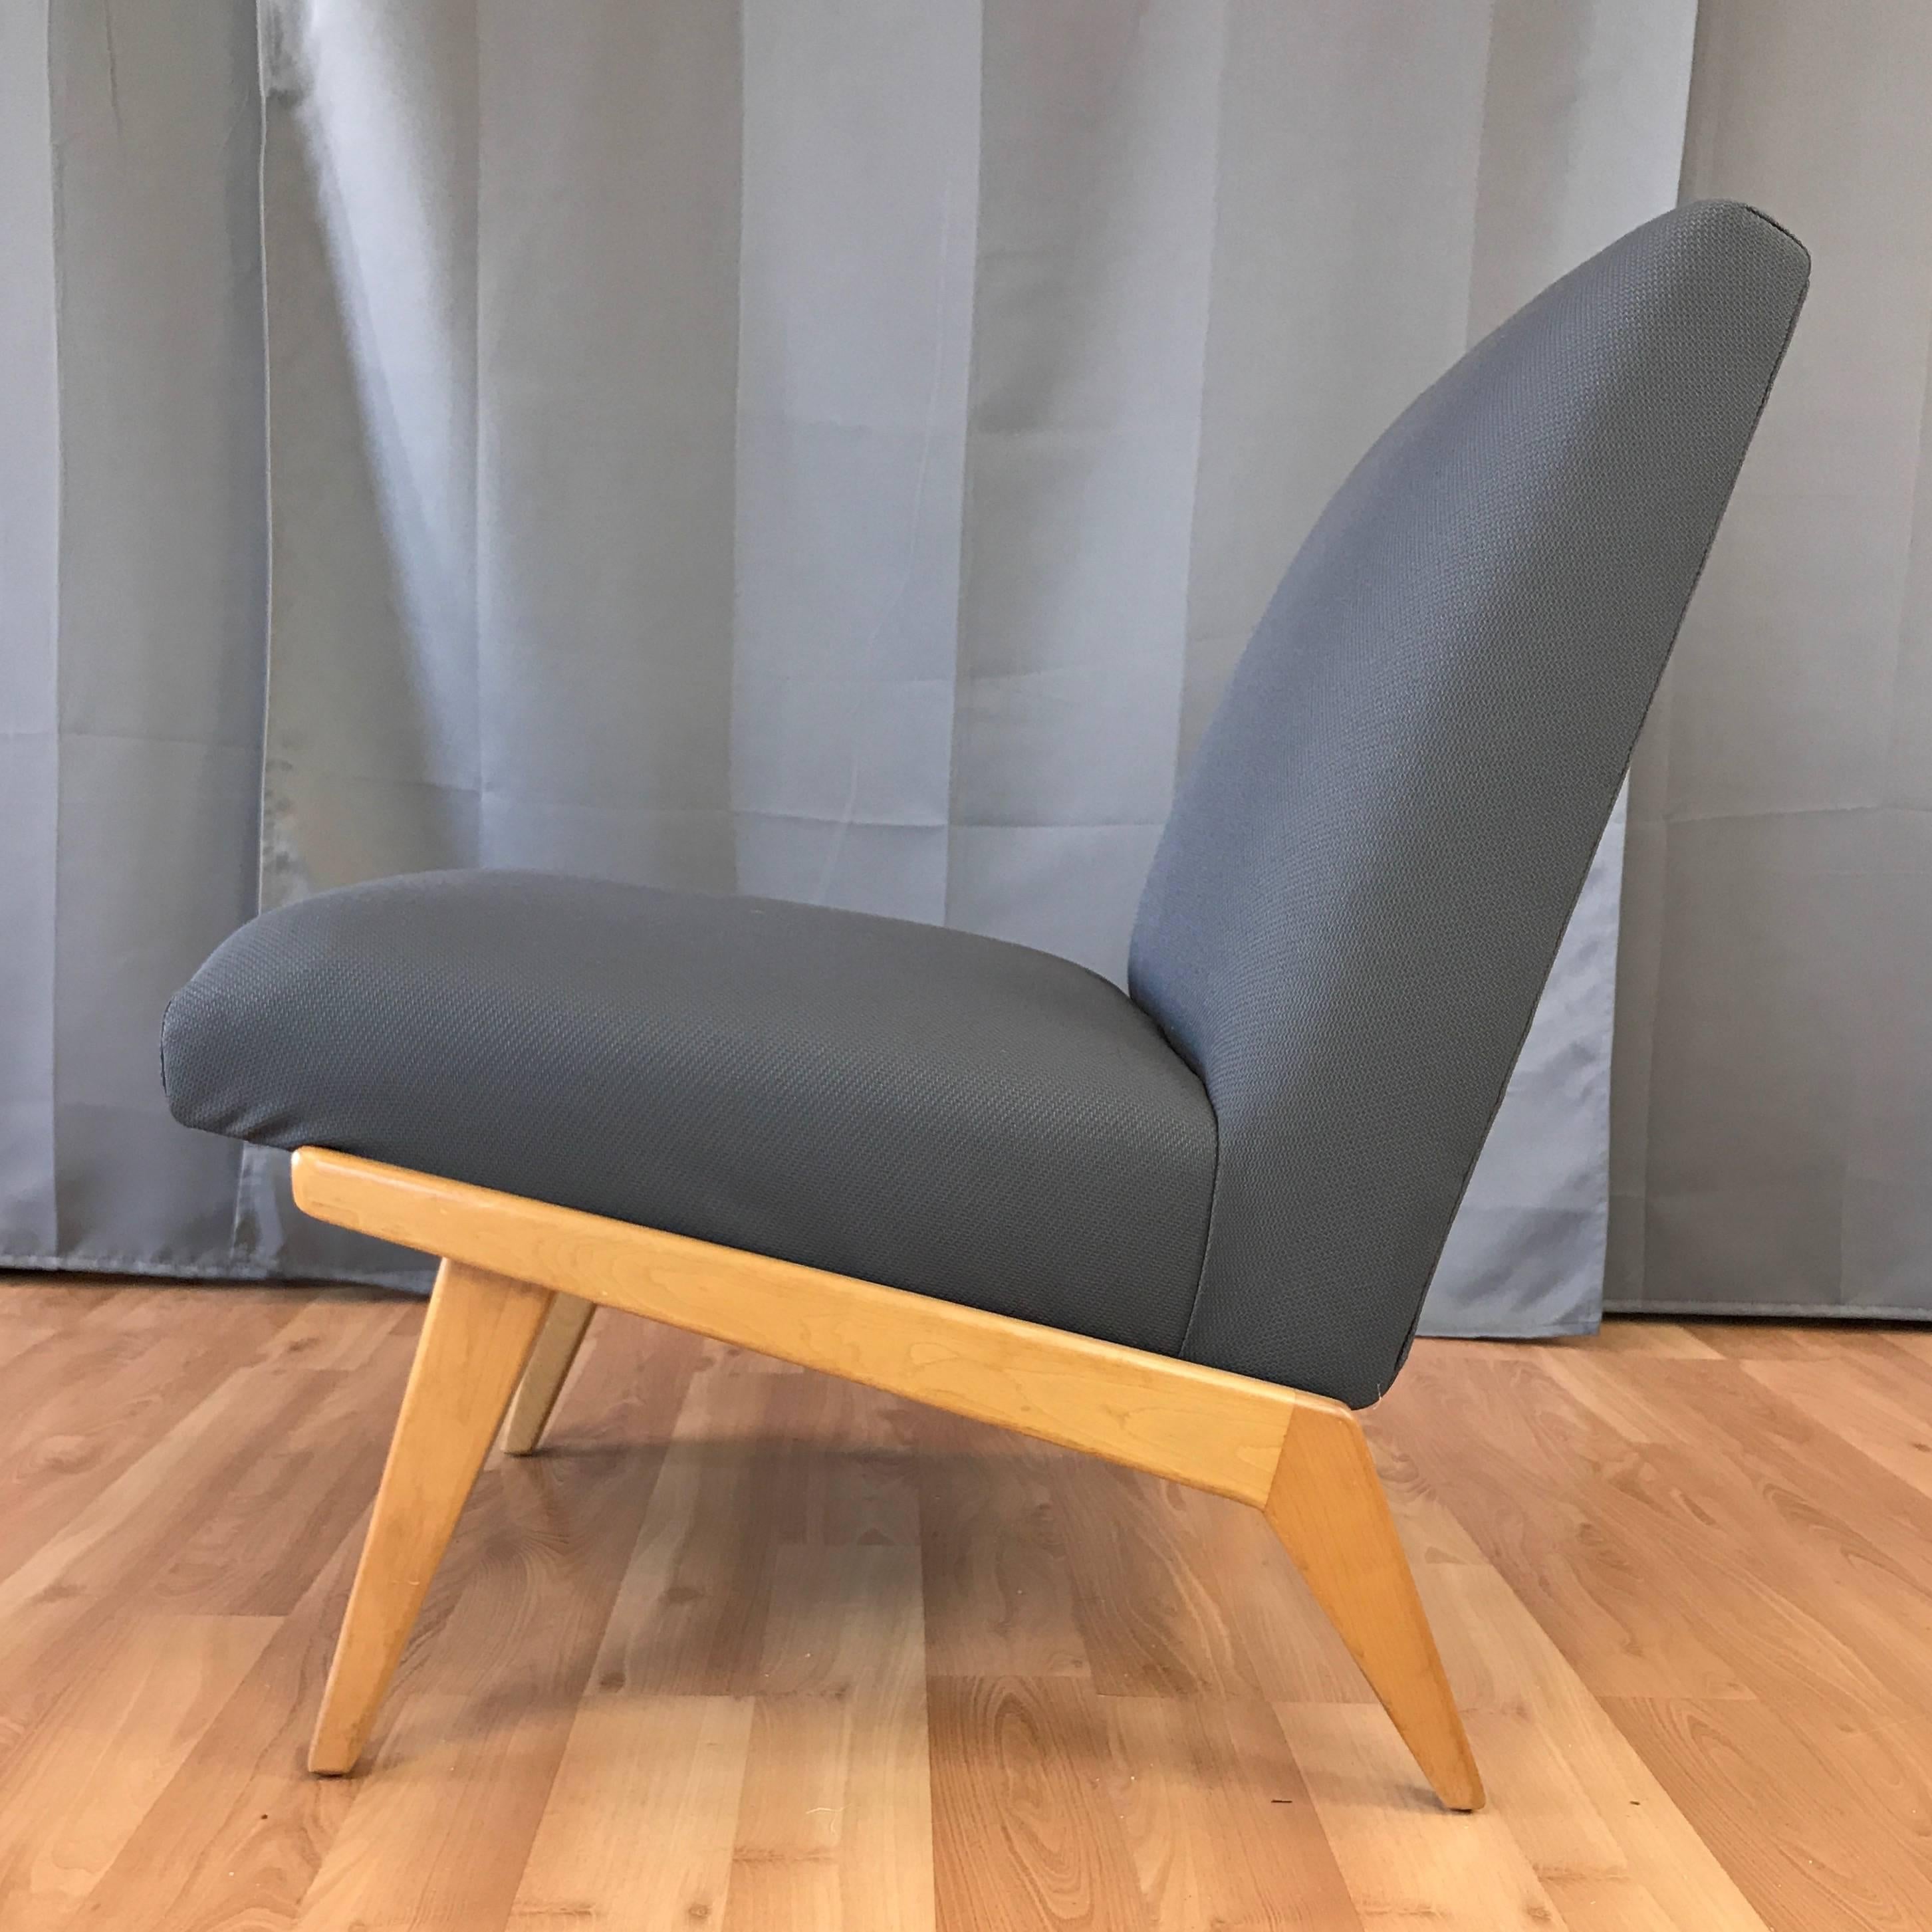 A streamlined slipper or armless lounge chair designed in 1946 by Jens Risom for Knoll Associates. Low-slung boomerang-leg base in solid maple. Newly reupholstered in handsome cool-hued grey basketweave.

Seat height is 17